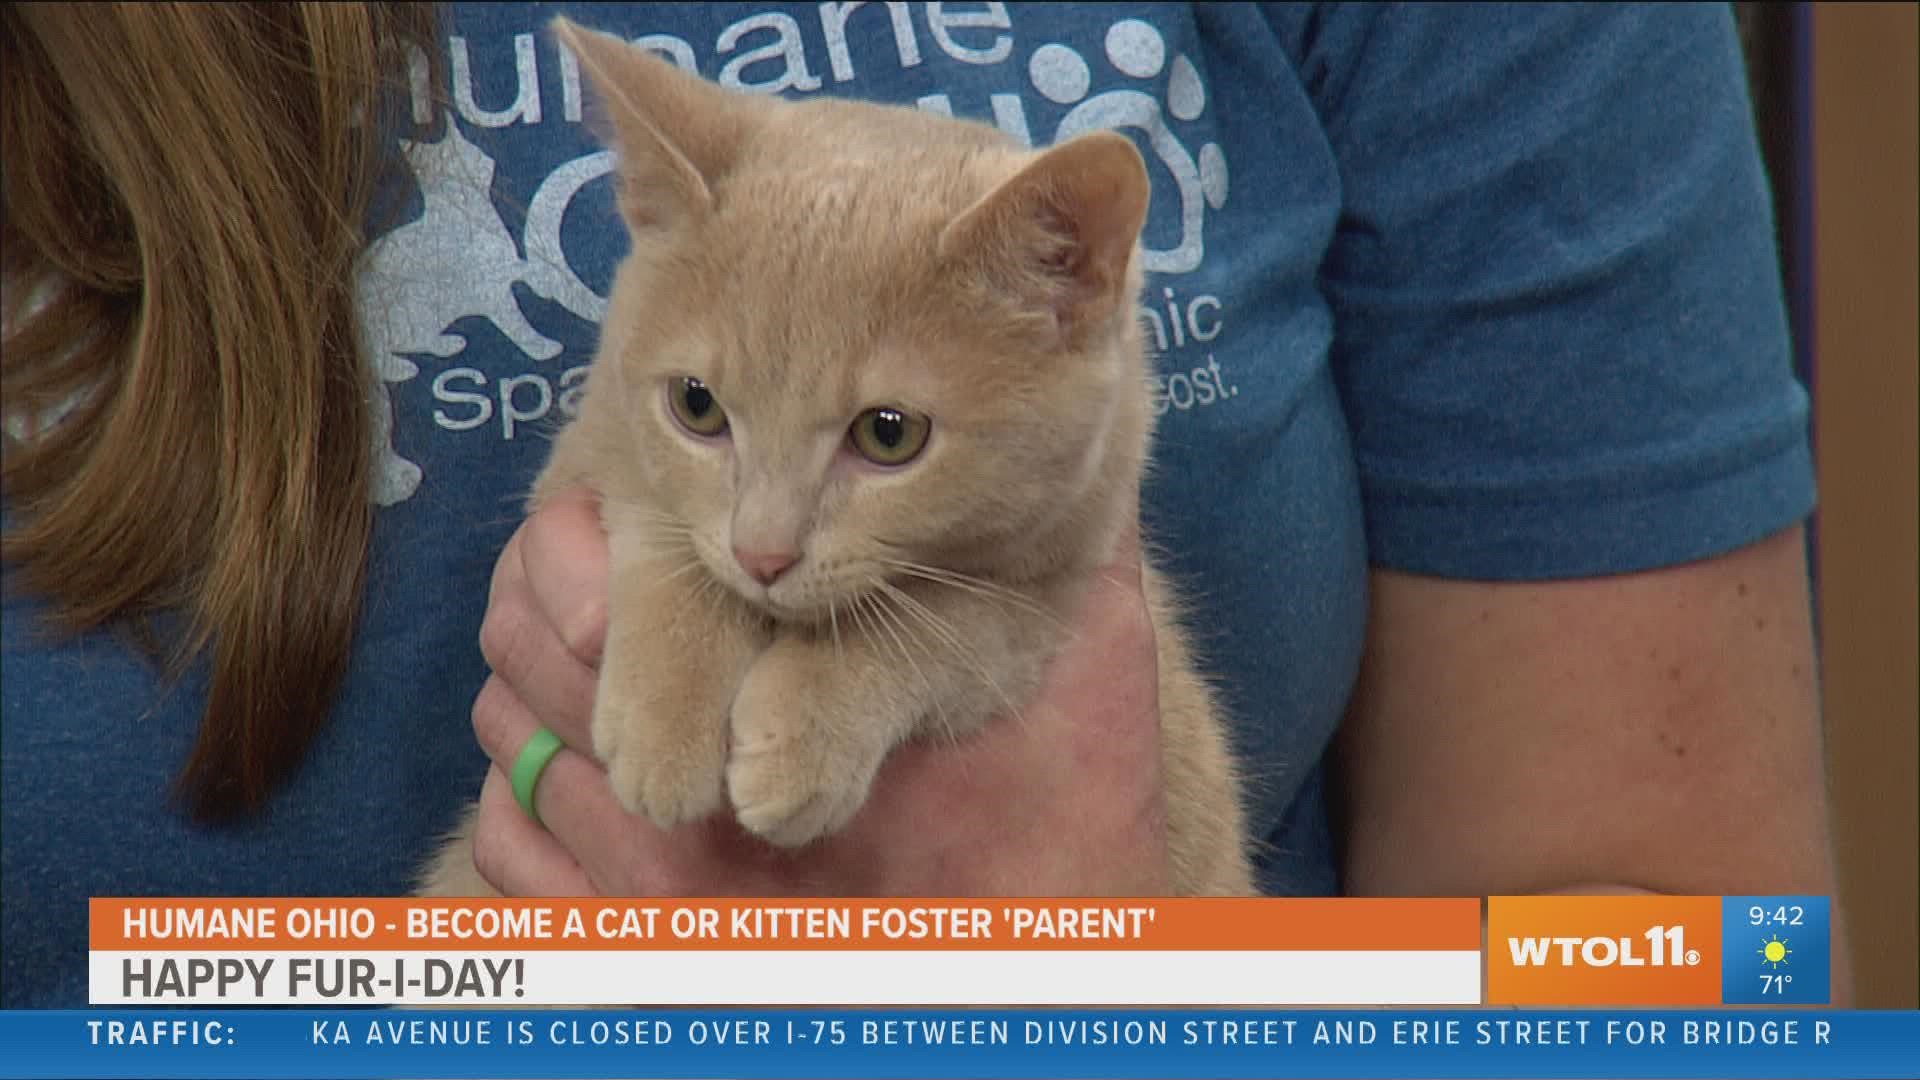 Help out pets at Humane Ohio by adopting, fostering or donating.